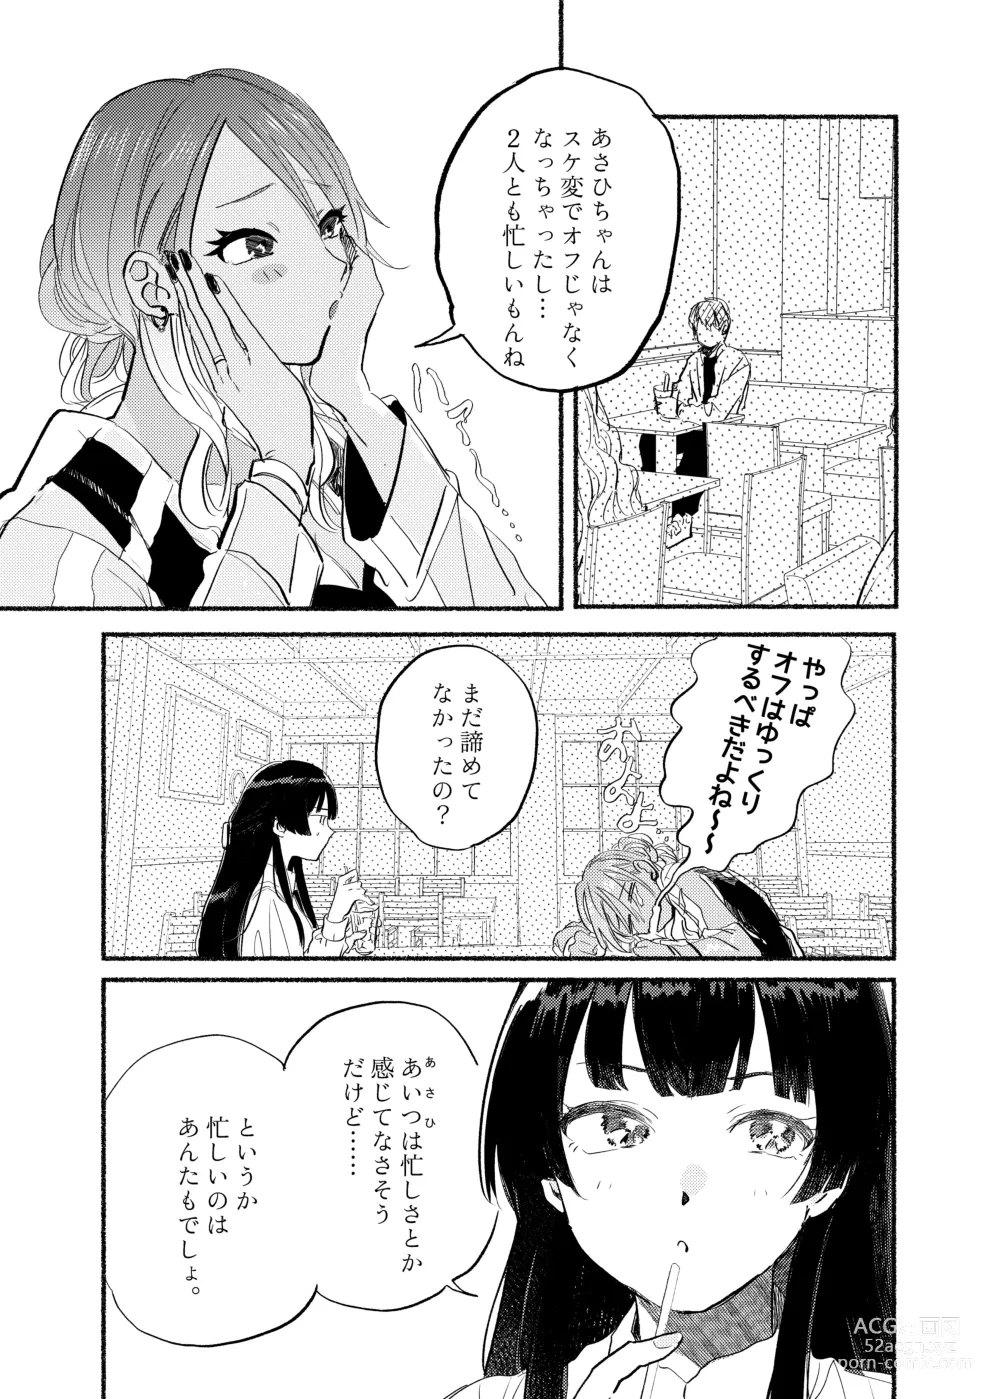 Page 5 of doujinshi IDENTITY REALIZE